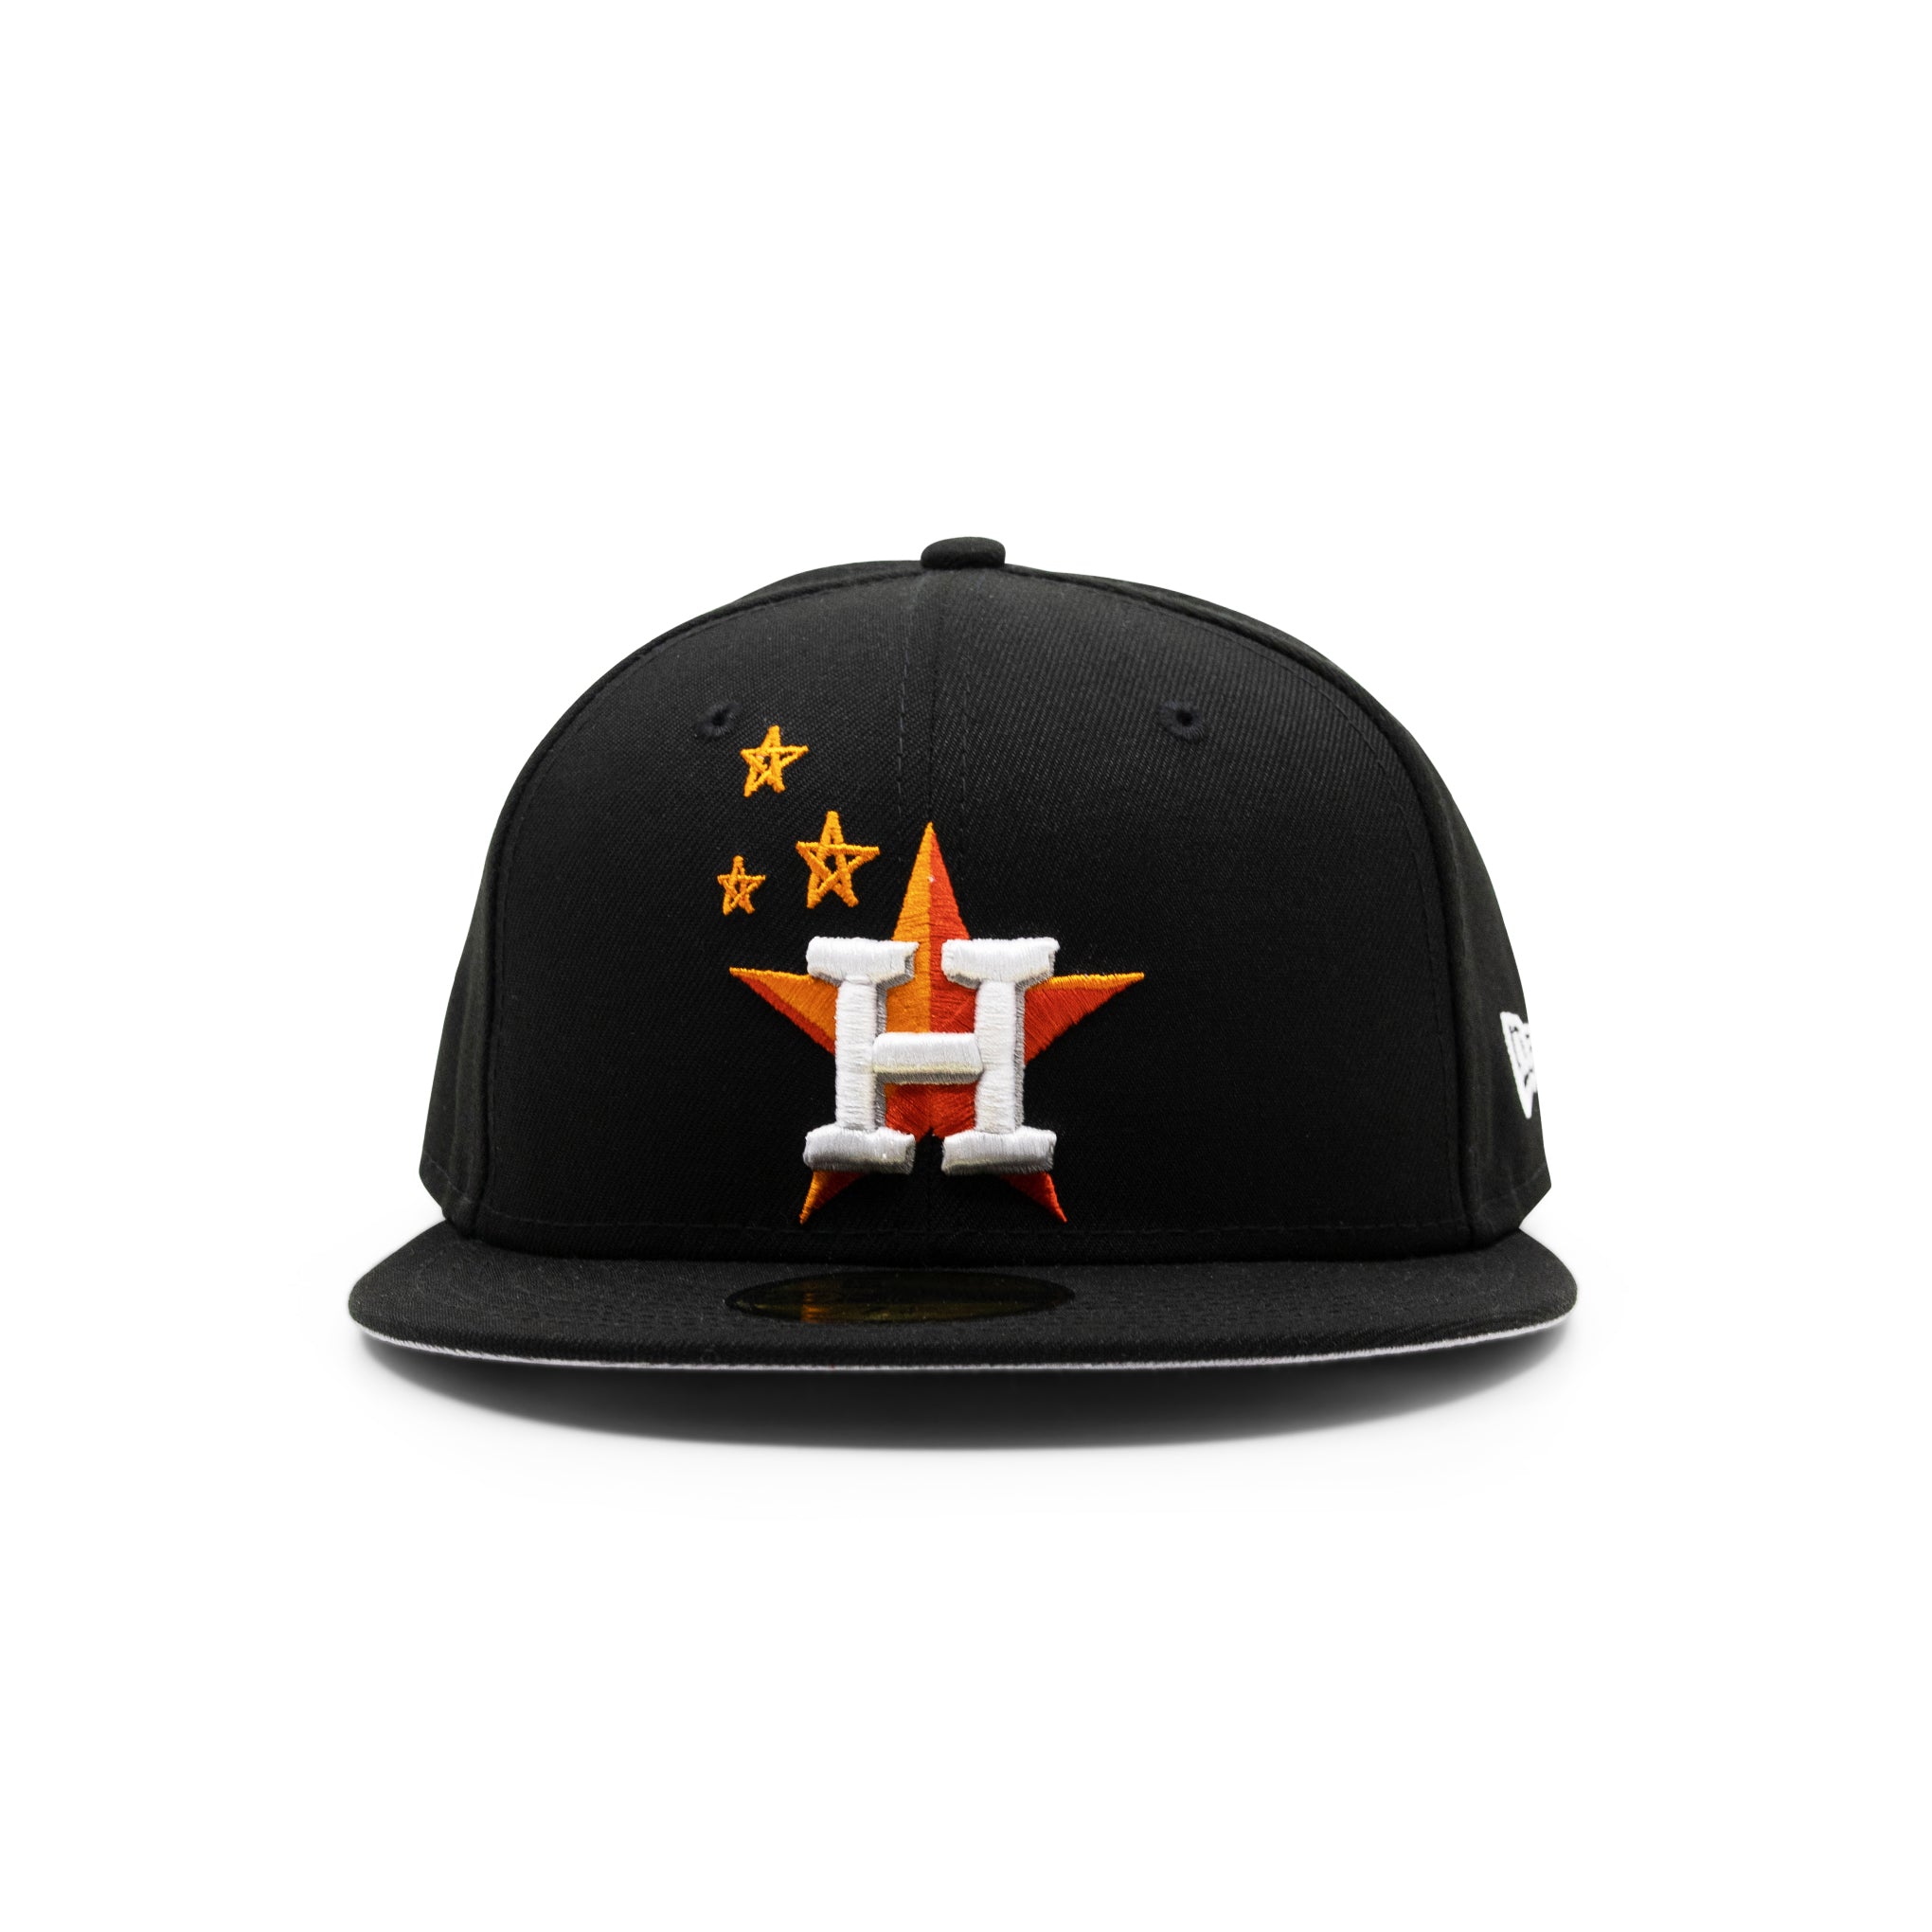 ABC13 Houston - 'LIT' LID: Houston Astros reveal exclusive cap designed by Travis  Scott, On sale only at Saturday's game